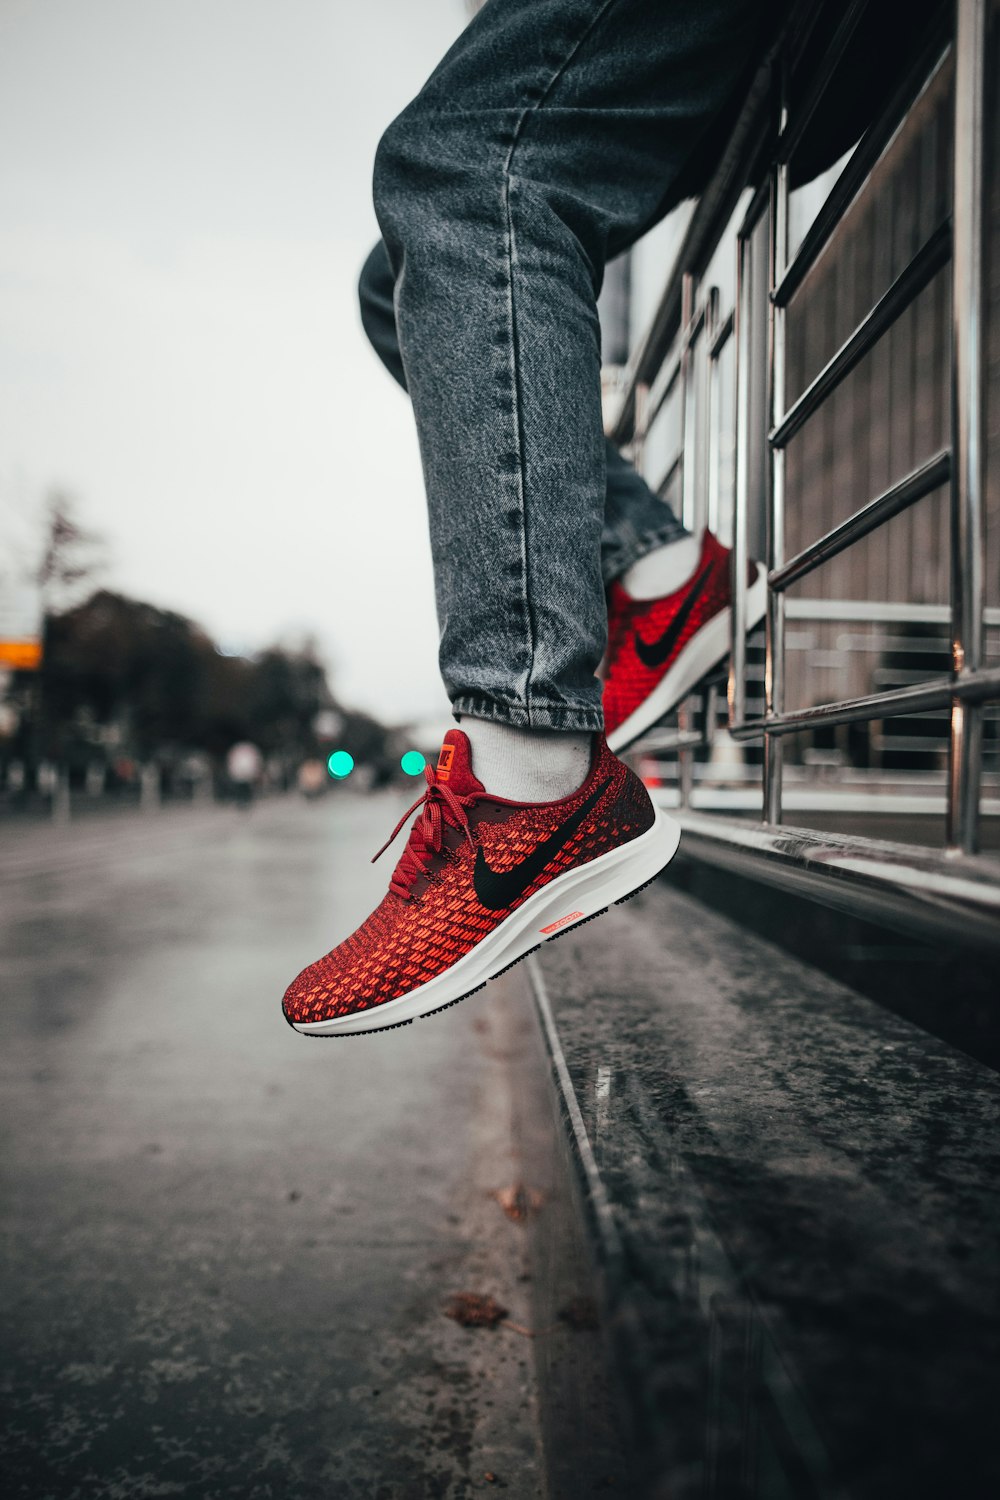 Person wearing red Nike sneakers photo – Free Clothing Image on Unsplash